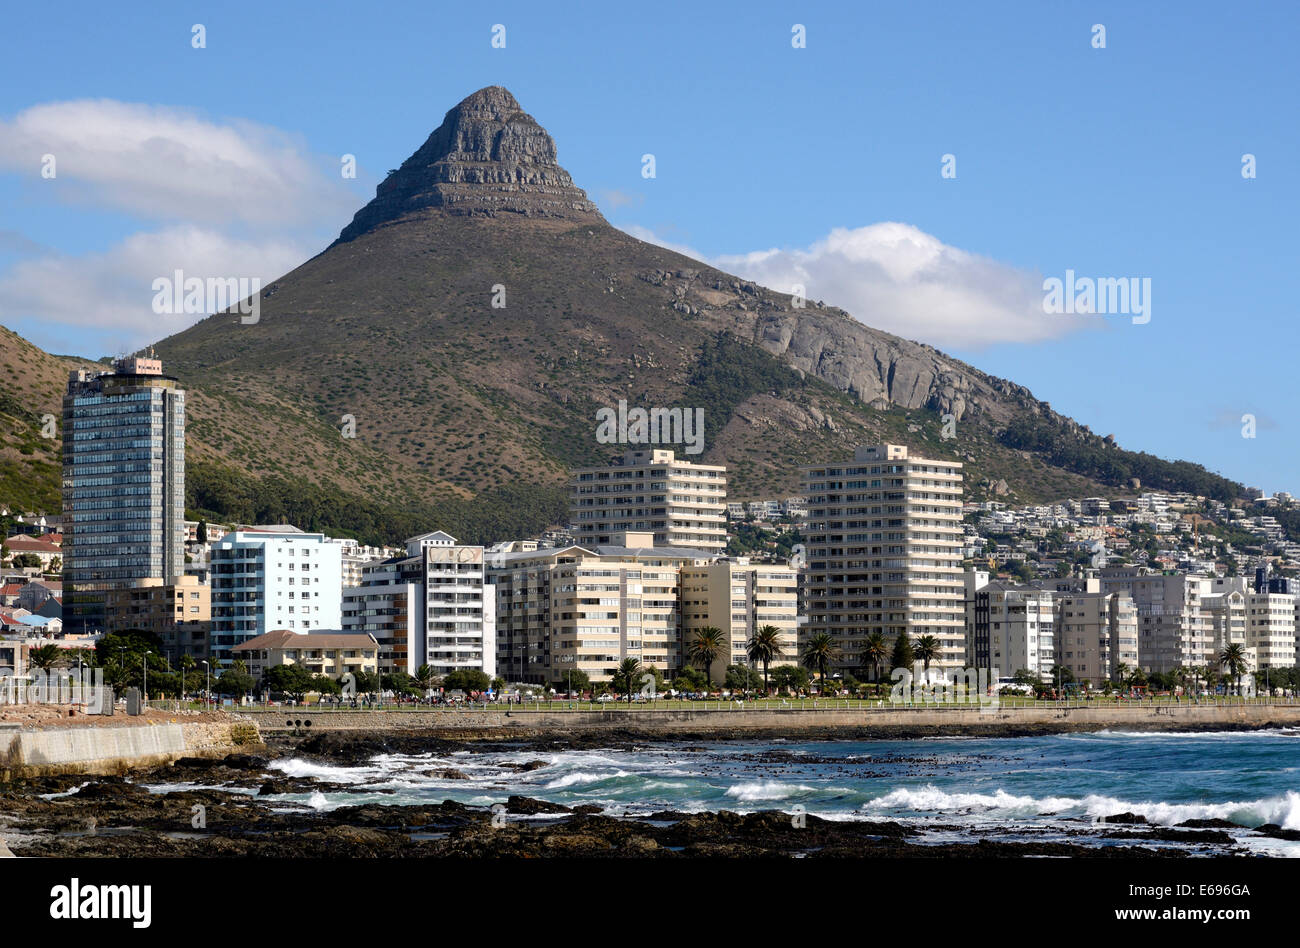 Beach in Cape Town, Lion's Head at the back, Cape Town, Western Cape, South Africa Stock Photo